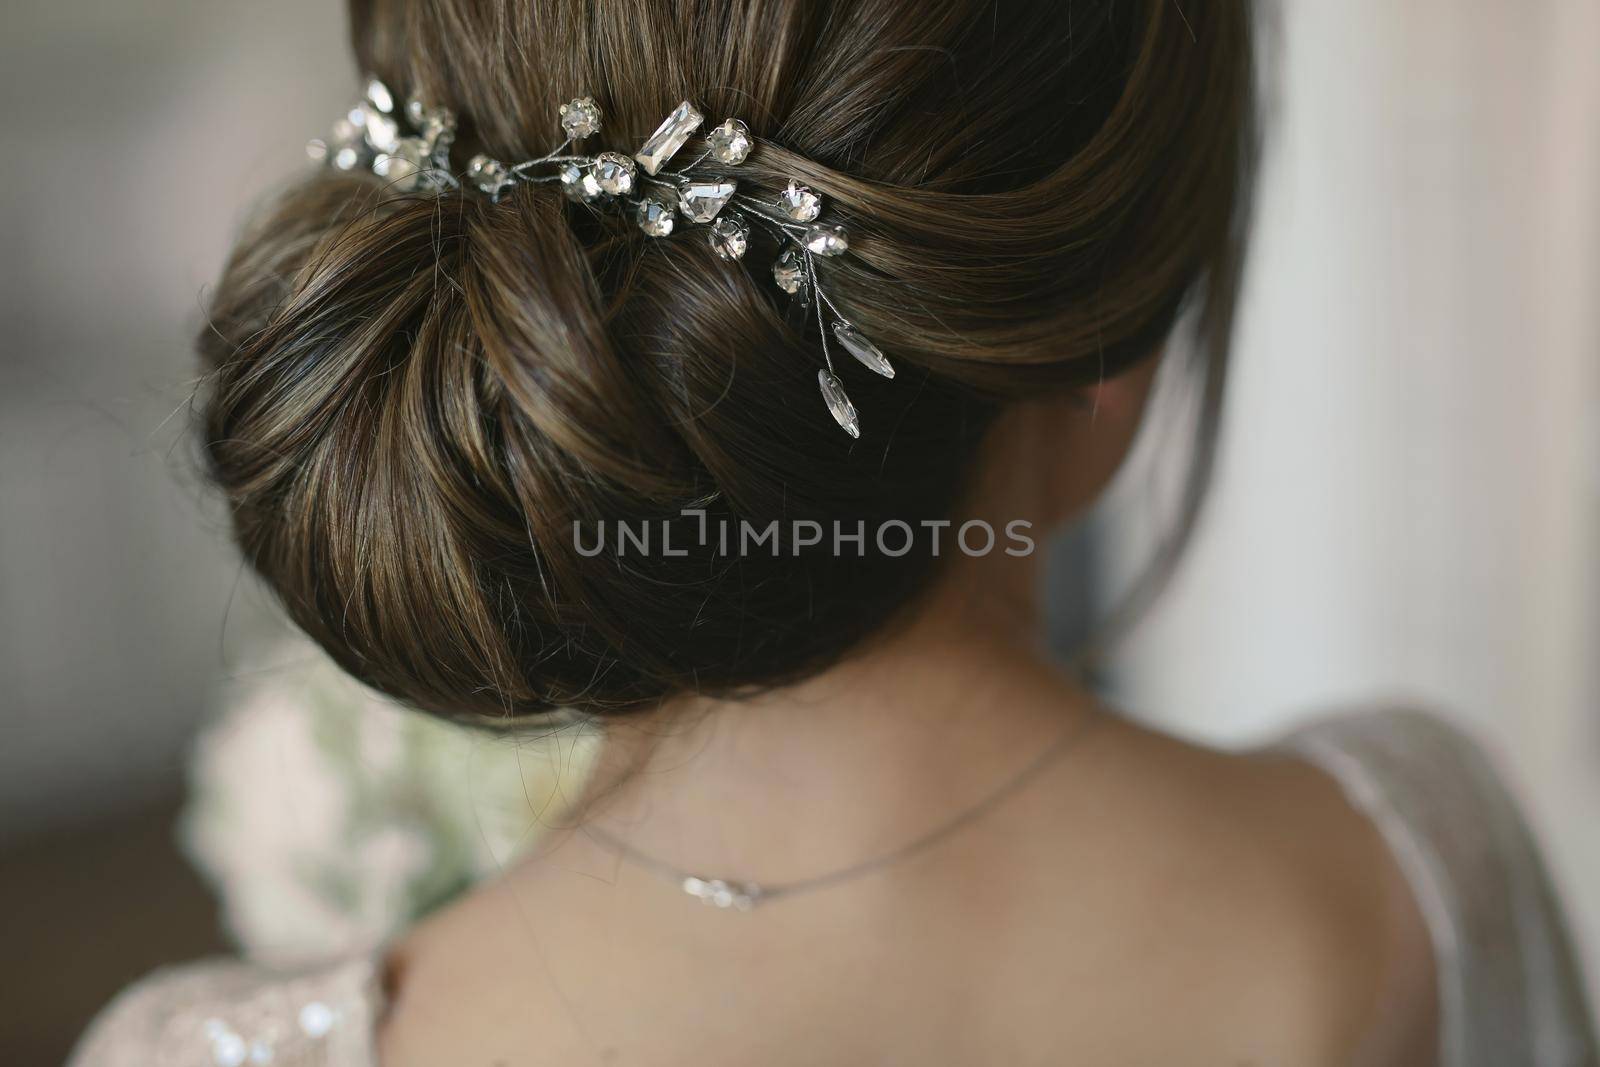 Wedding hairstyle of the bride. Rear view